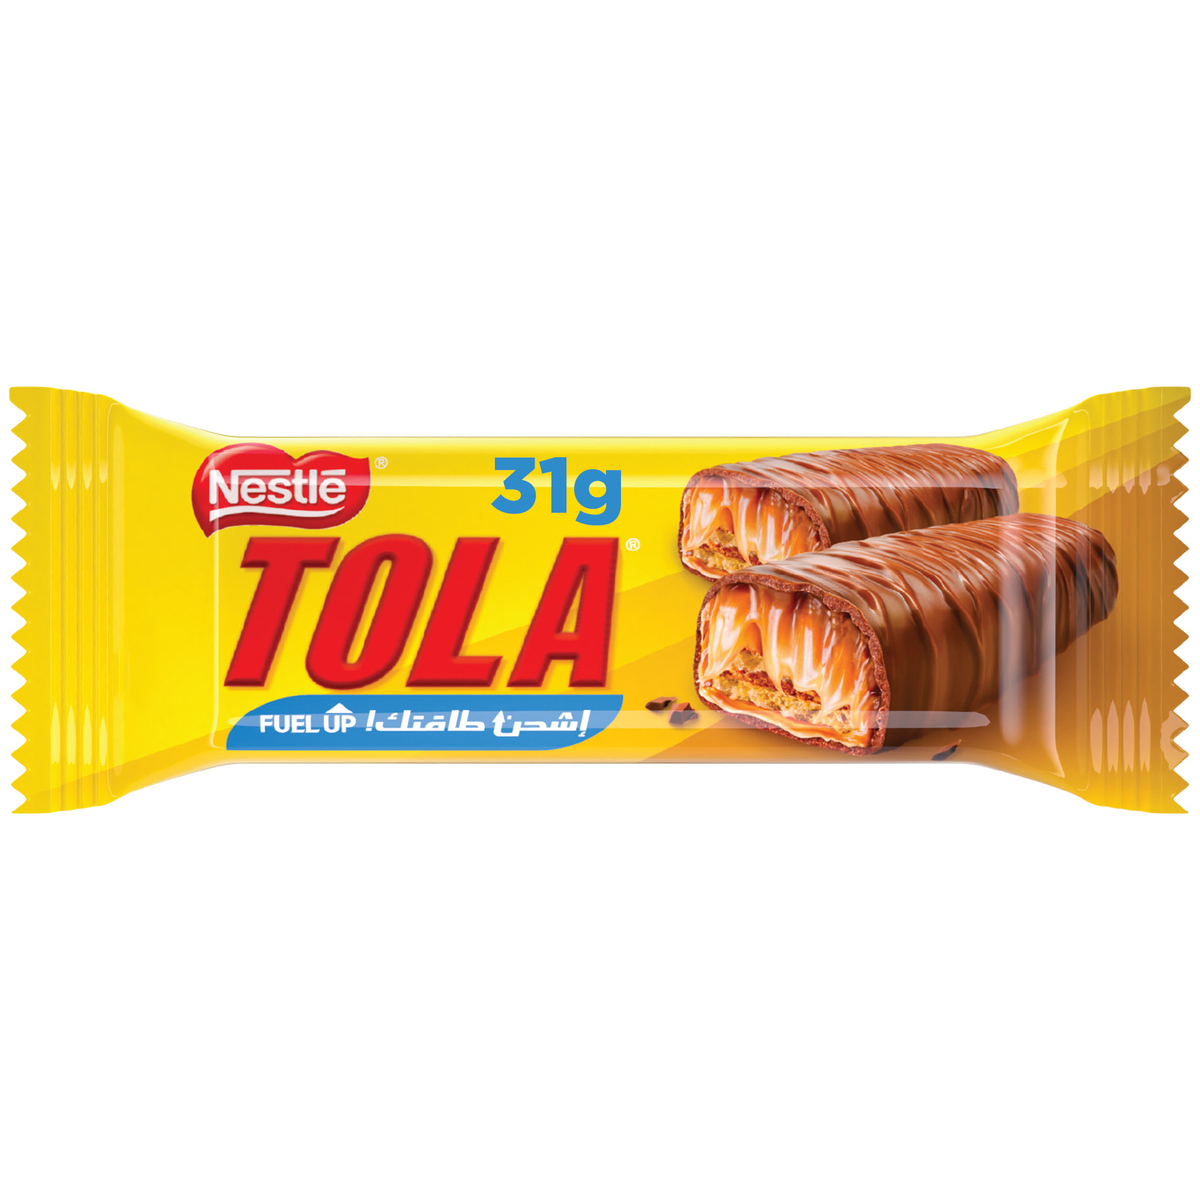 Buy Tola Wrapper 2 Finger Crispy Wafer Covered with Caramel and Milk Chocolate 24 x 31 g Online at Best Price | Covrd Choco.Bars&Tab | Lulu Kuwait in Kuwait